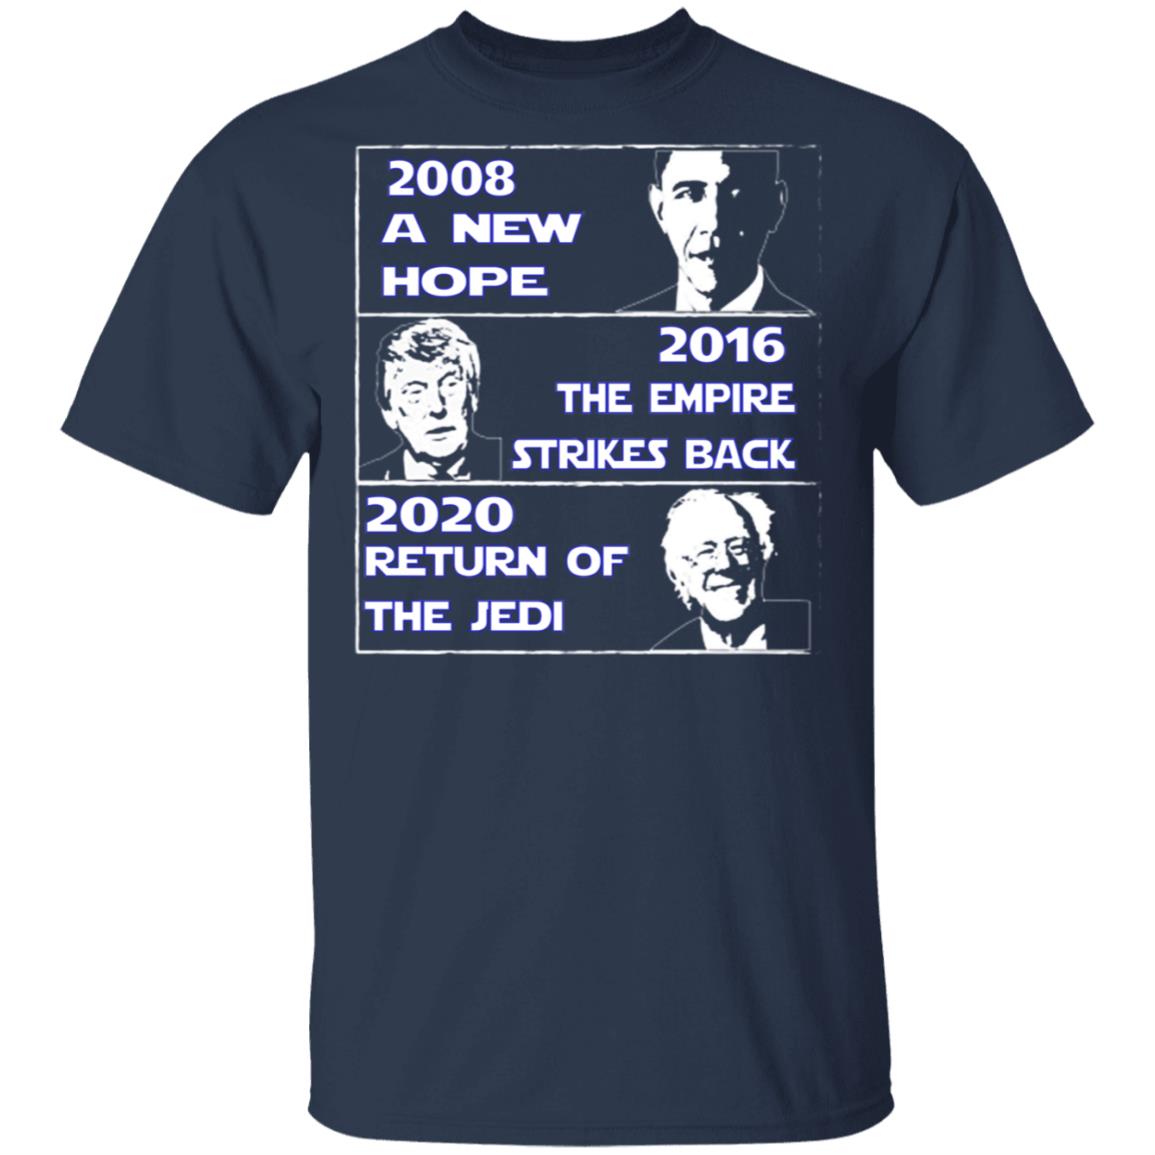 2008 A New Hope – 2016 The Empire Strikes Back T-Shirts, Hoodies